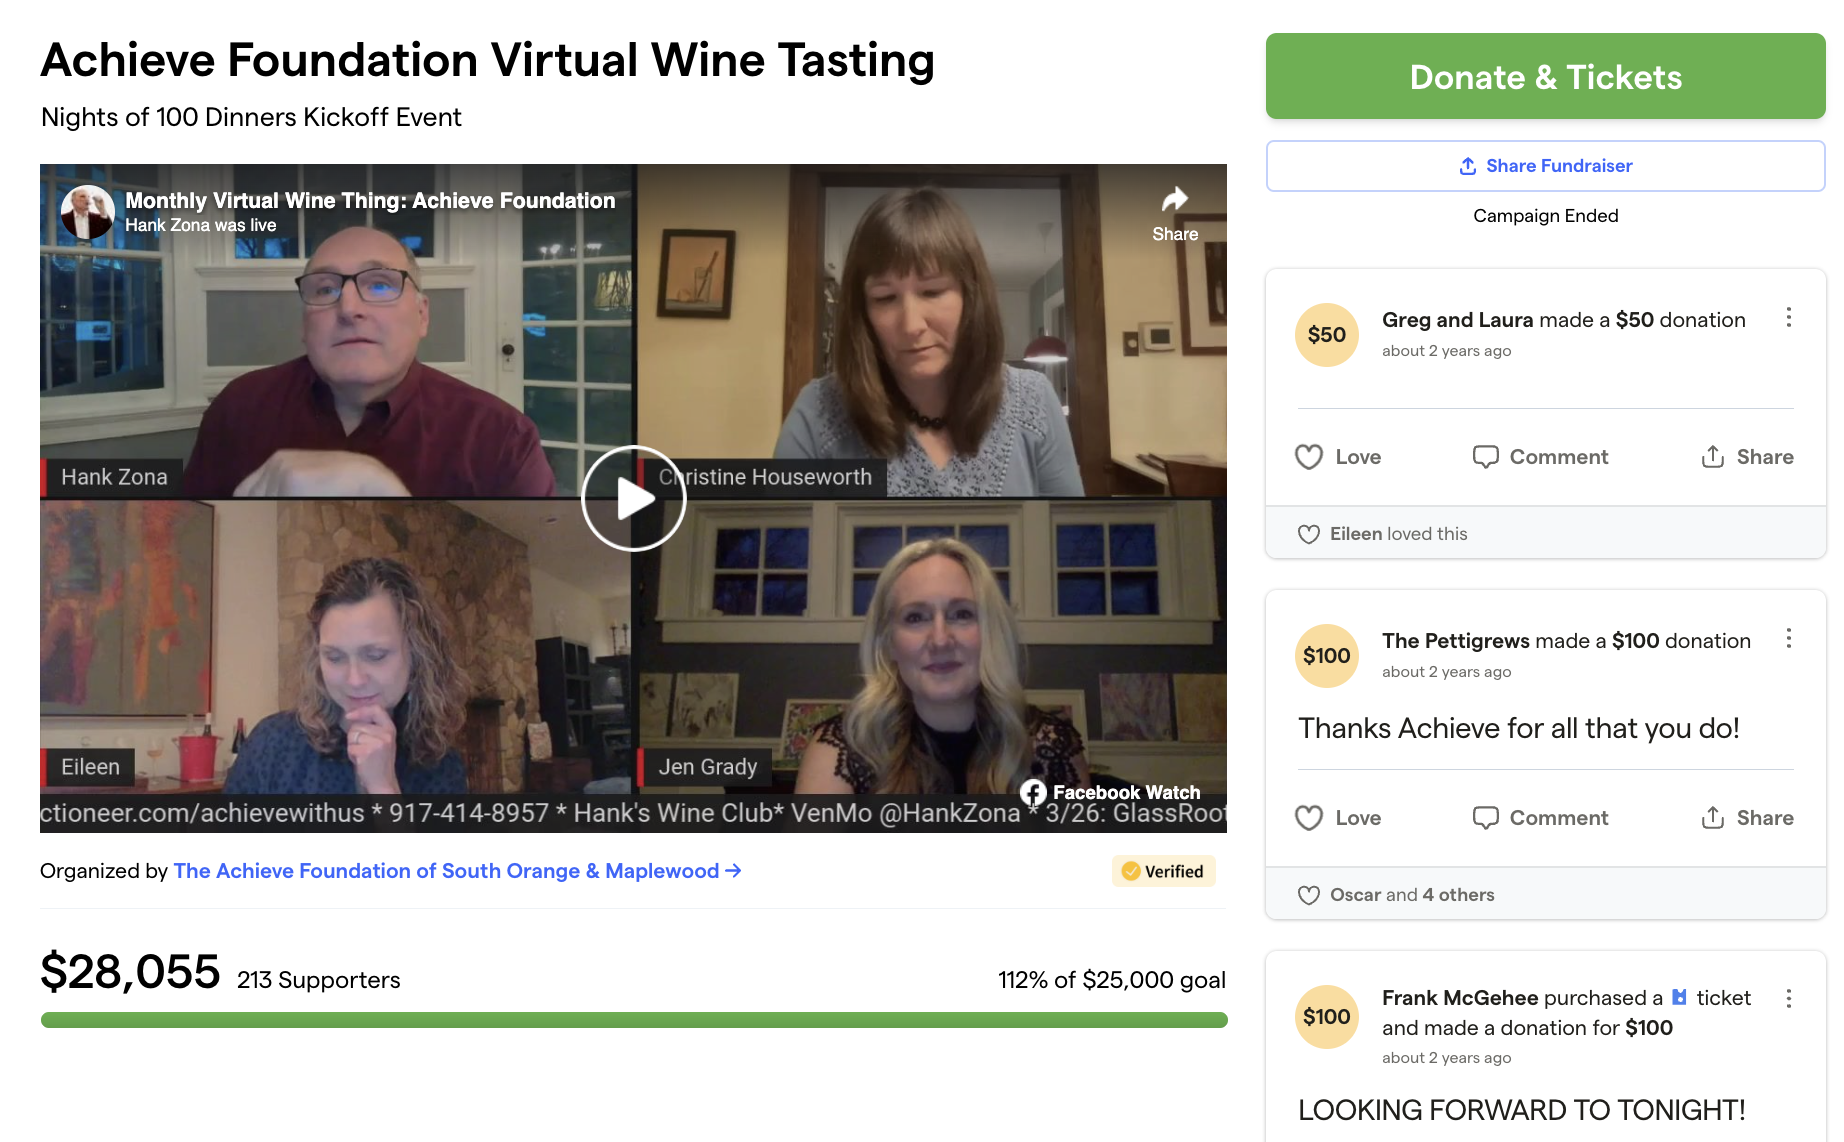 Virtual wine tasting event hosted by The Achieve Foundation